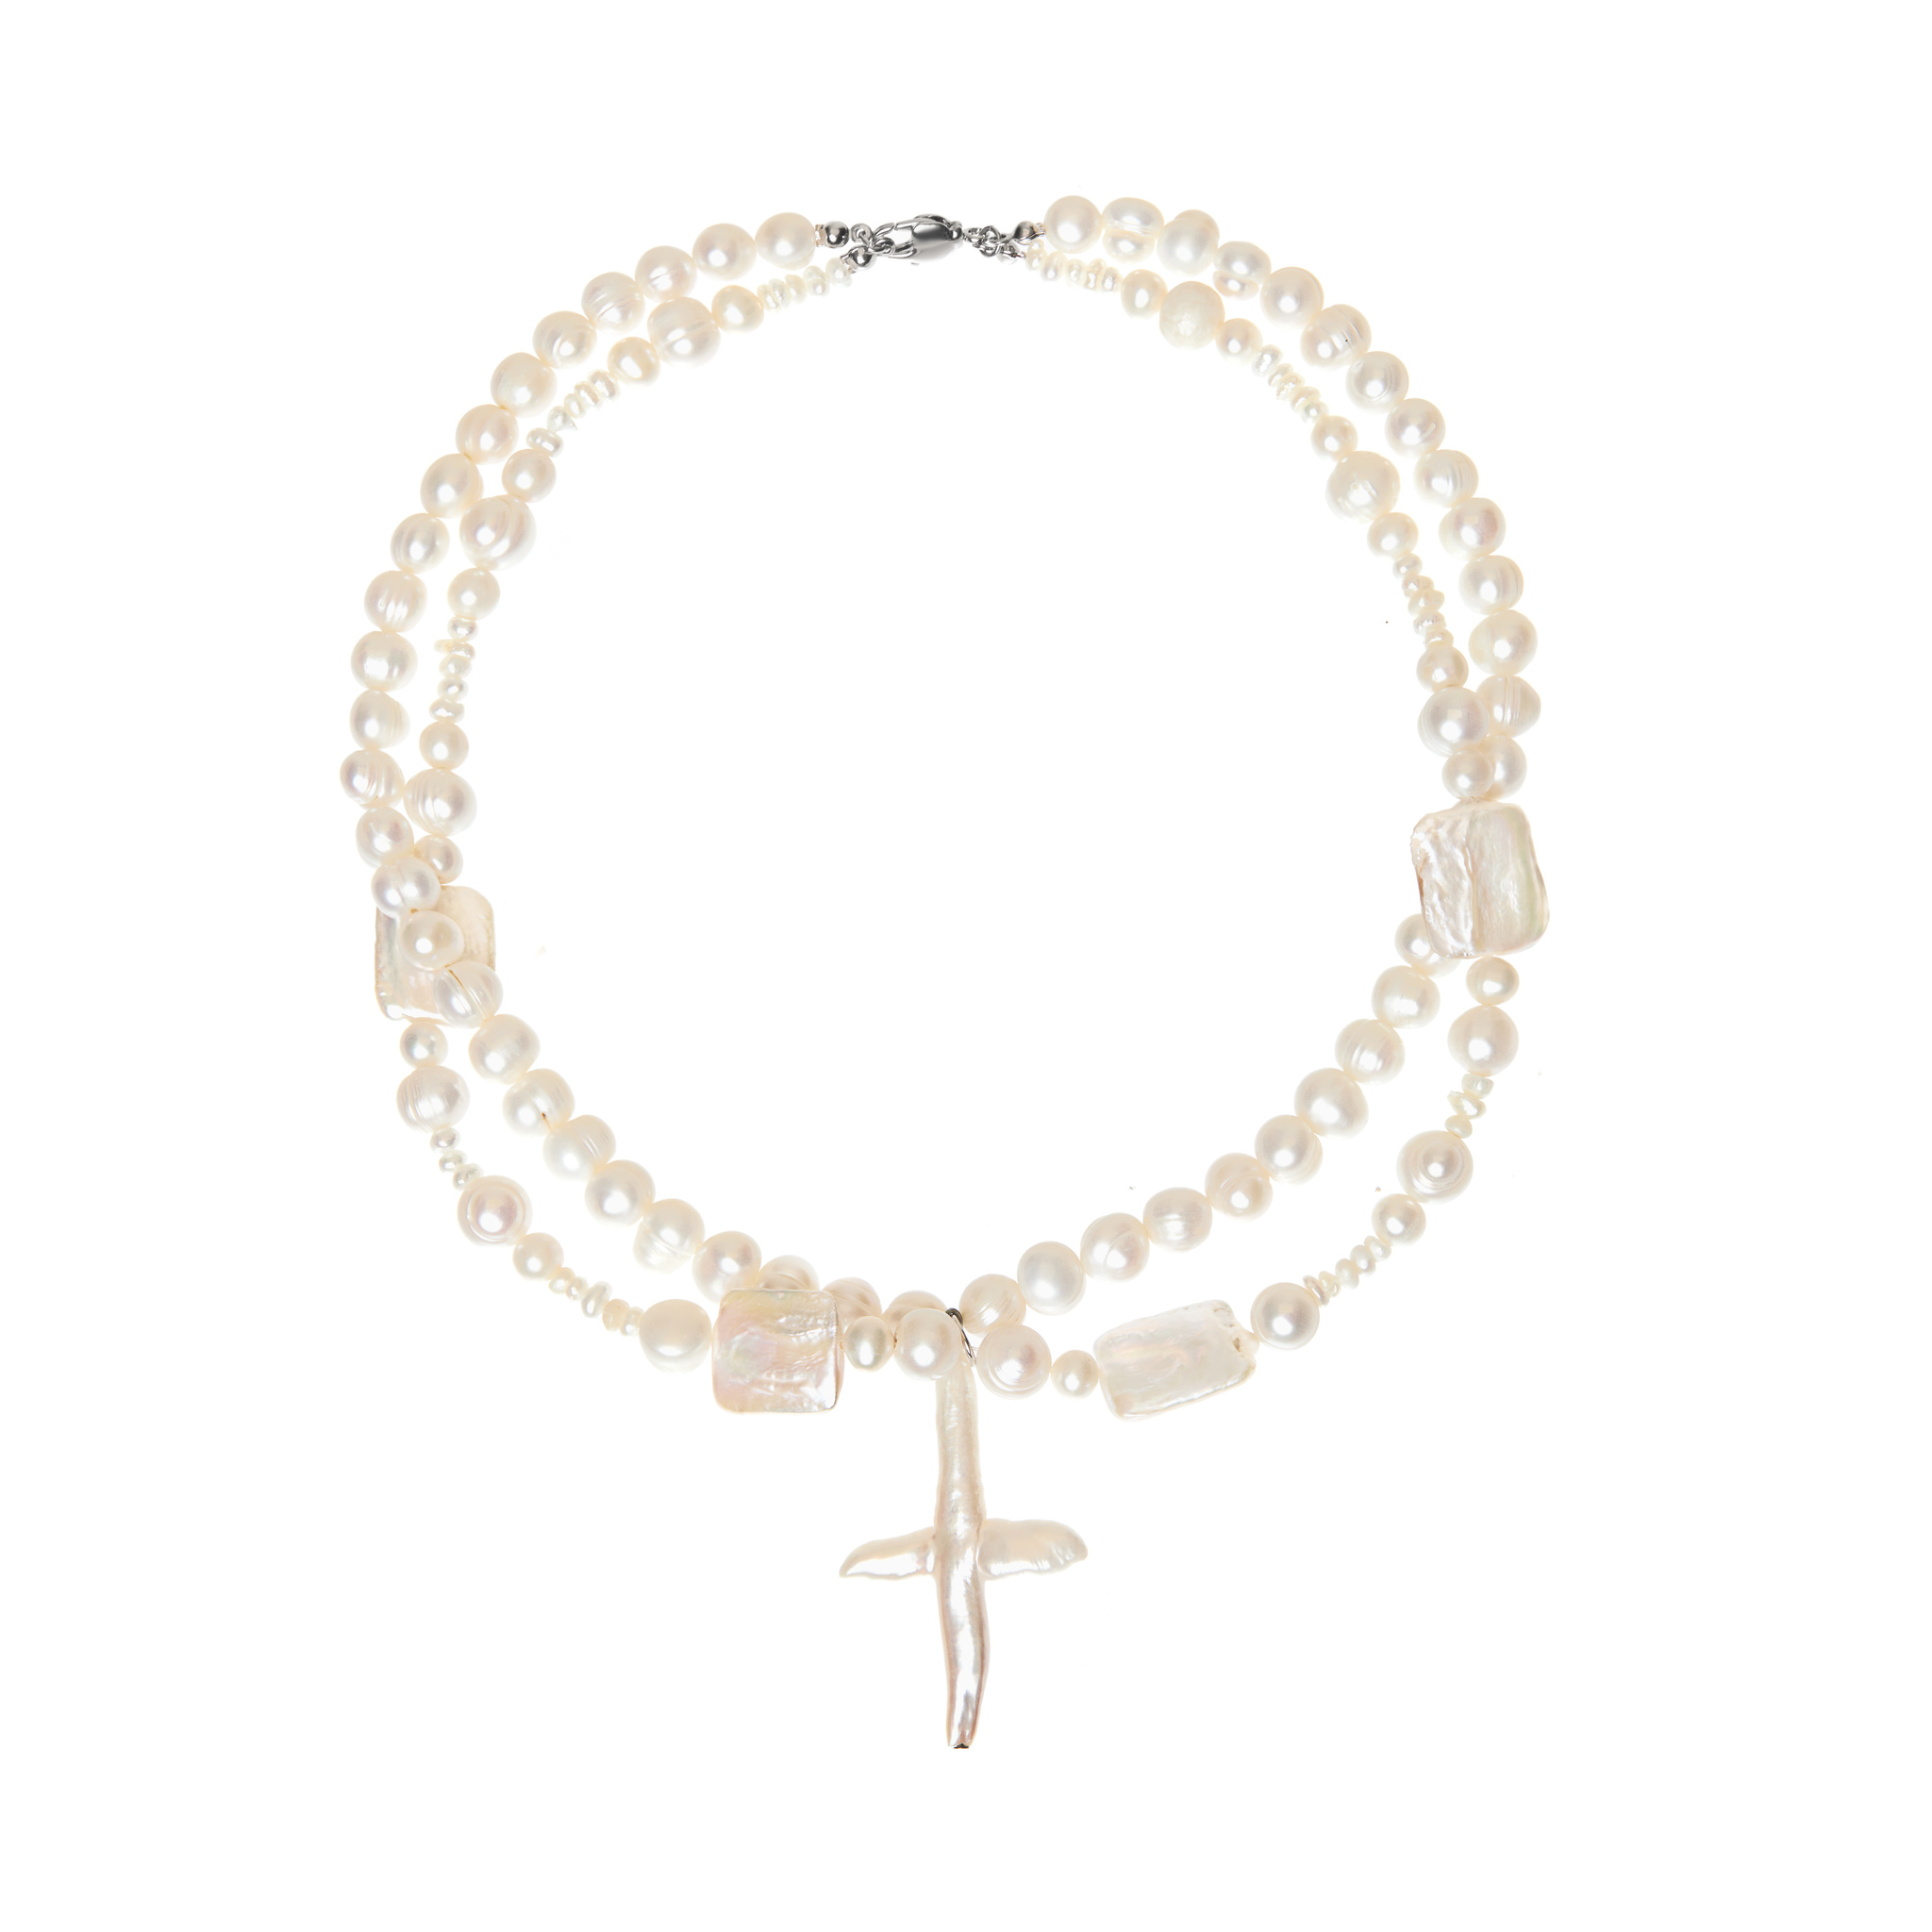 HOLLY JUNE Колье Pearly Abundance Cross Necklace – Nacre holly june серьга pearly mess earring